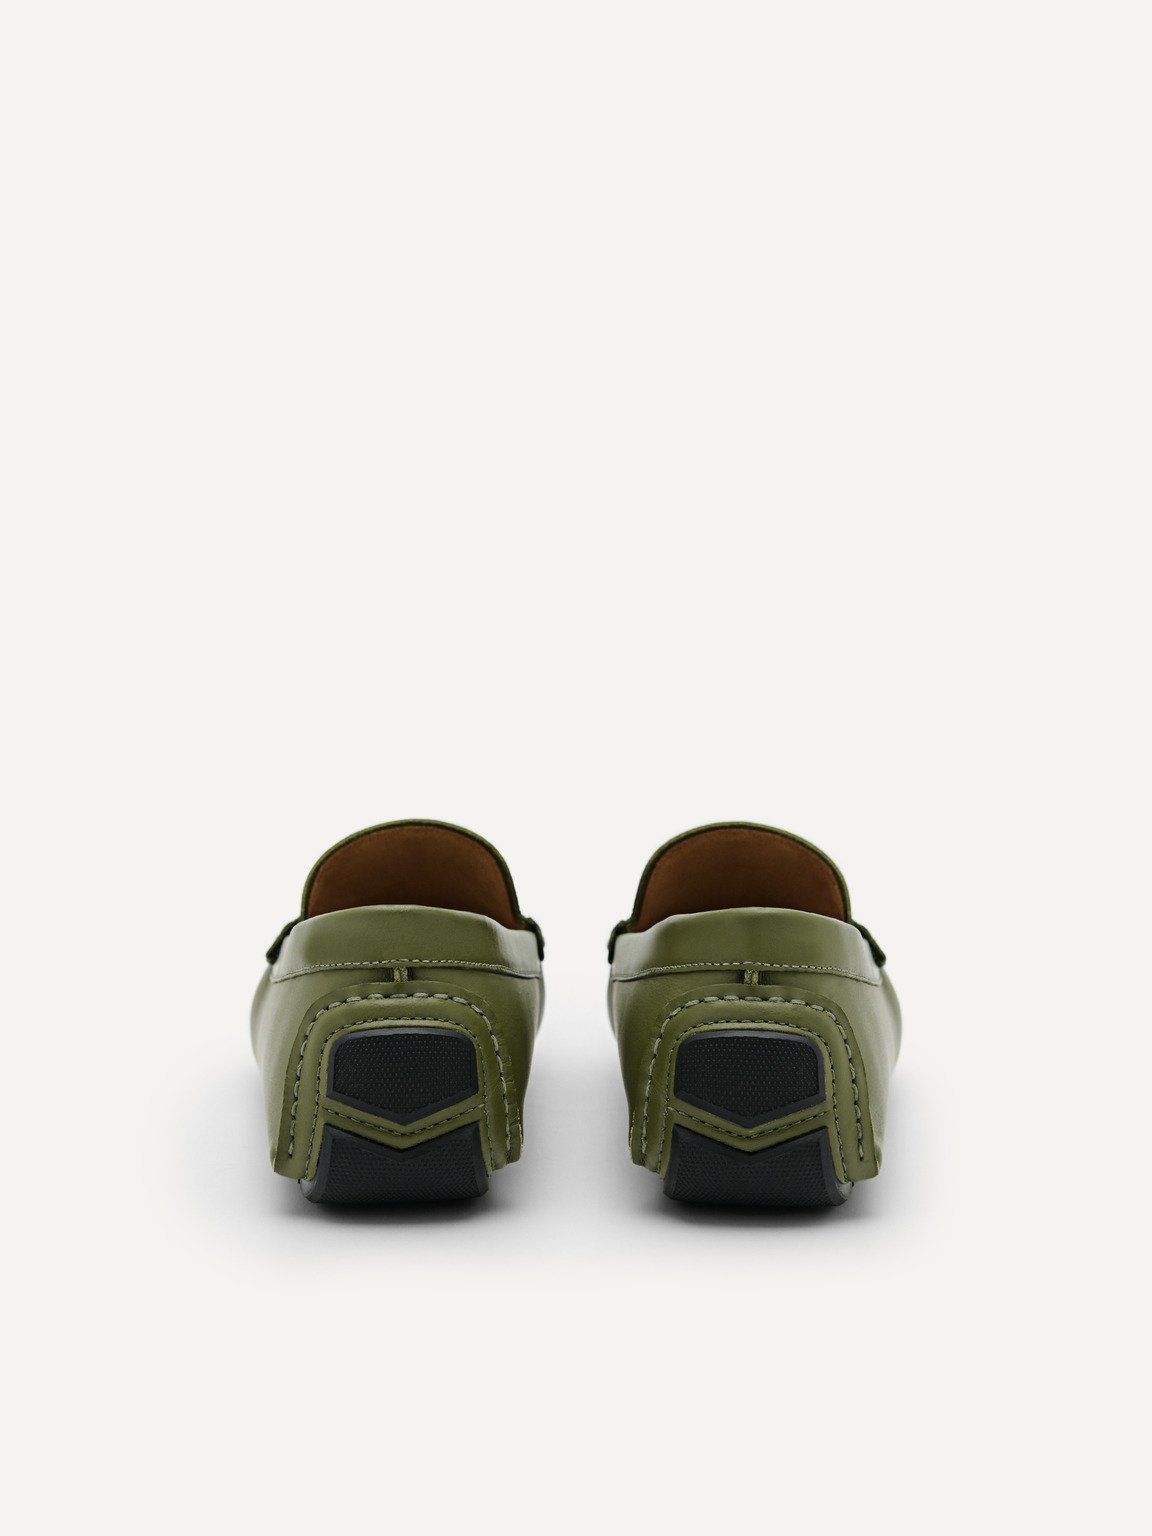 Leather Horsebit Driving Shoes, Military Green